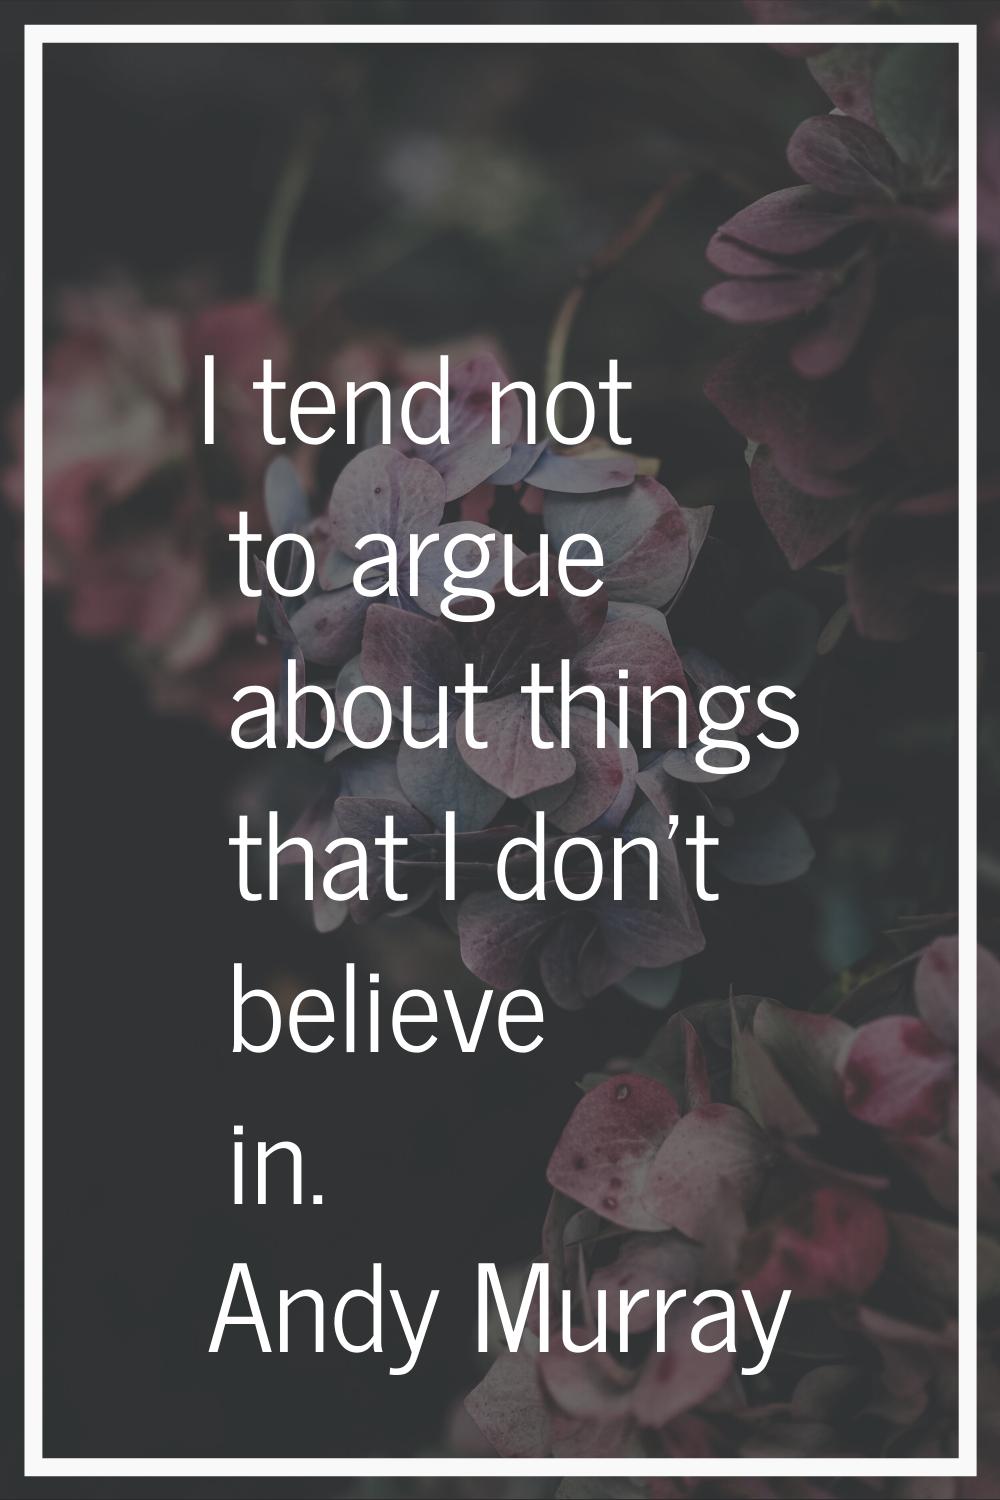 I tend not to argue about things that I don't believe in.